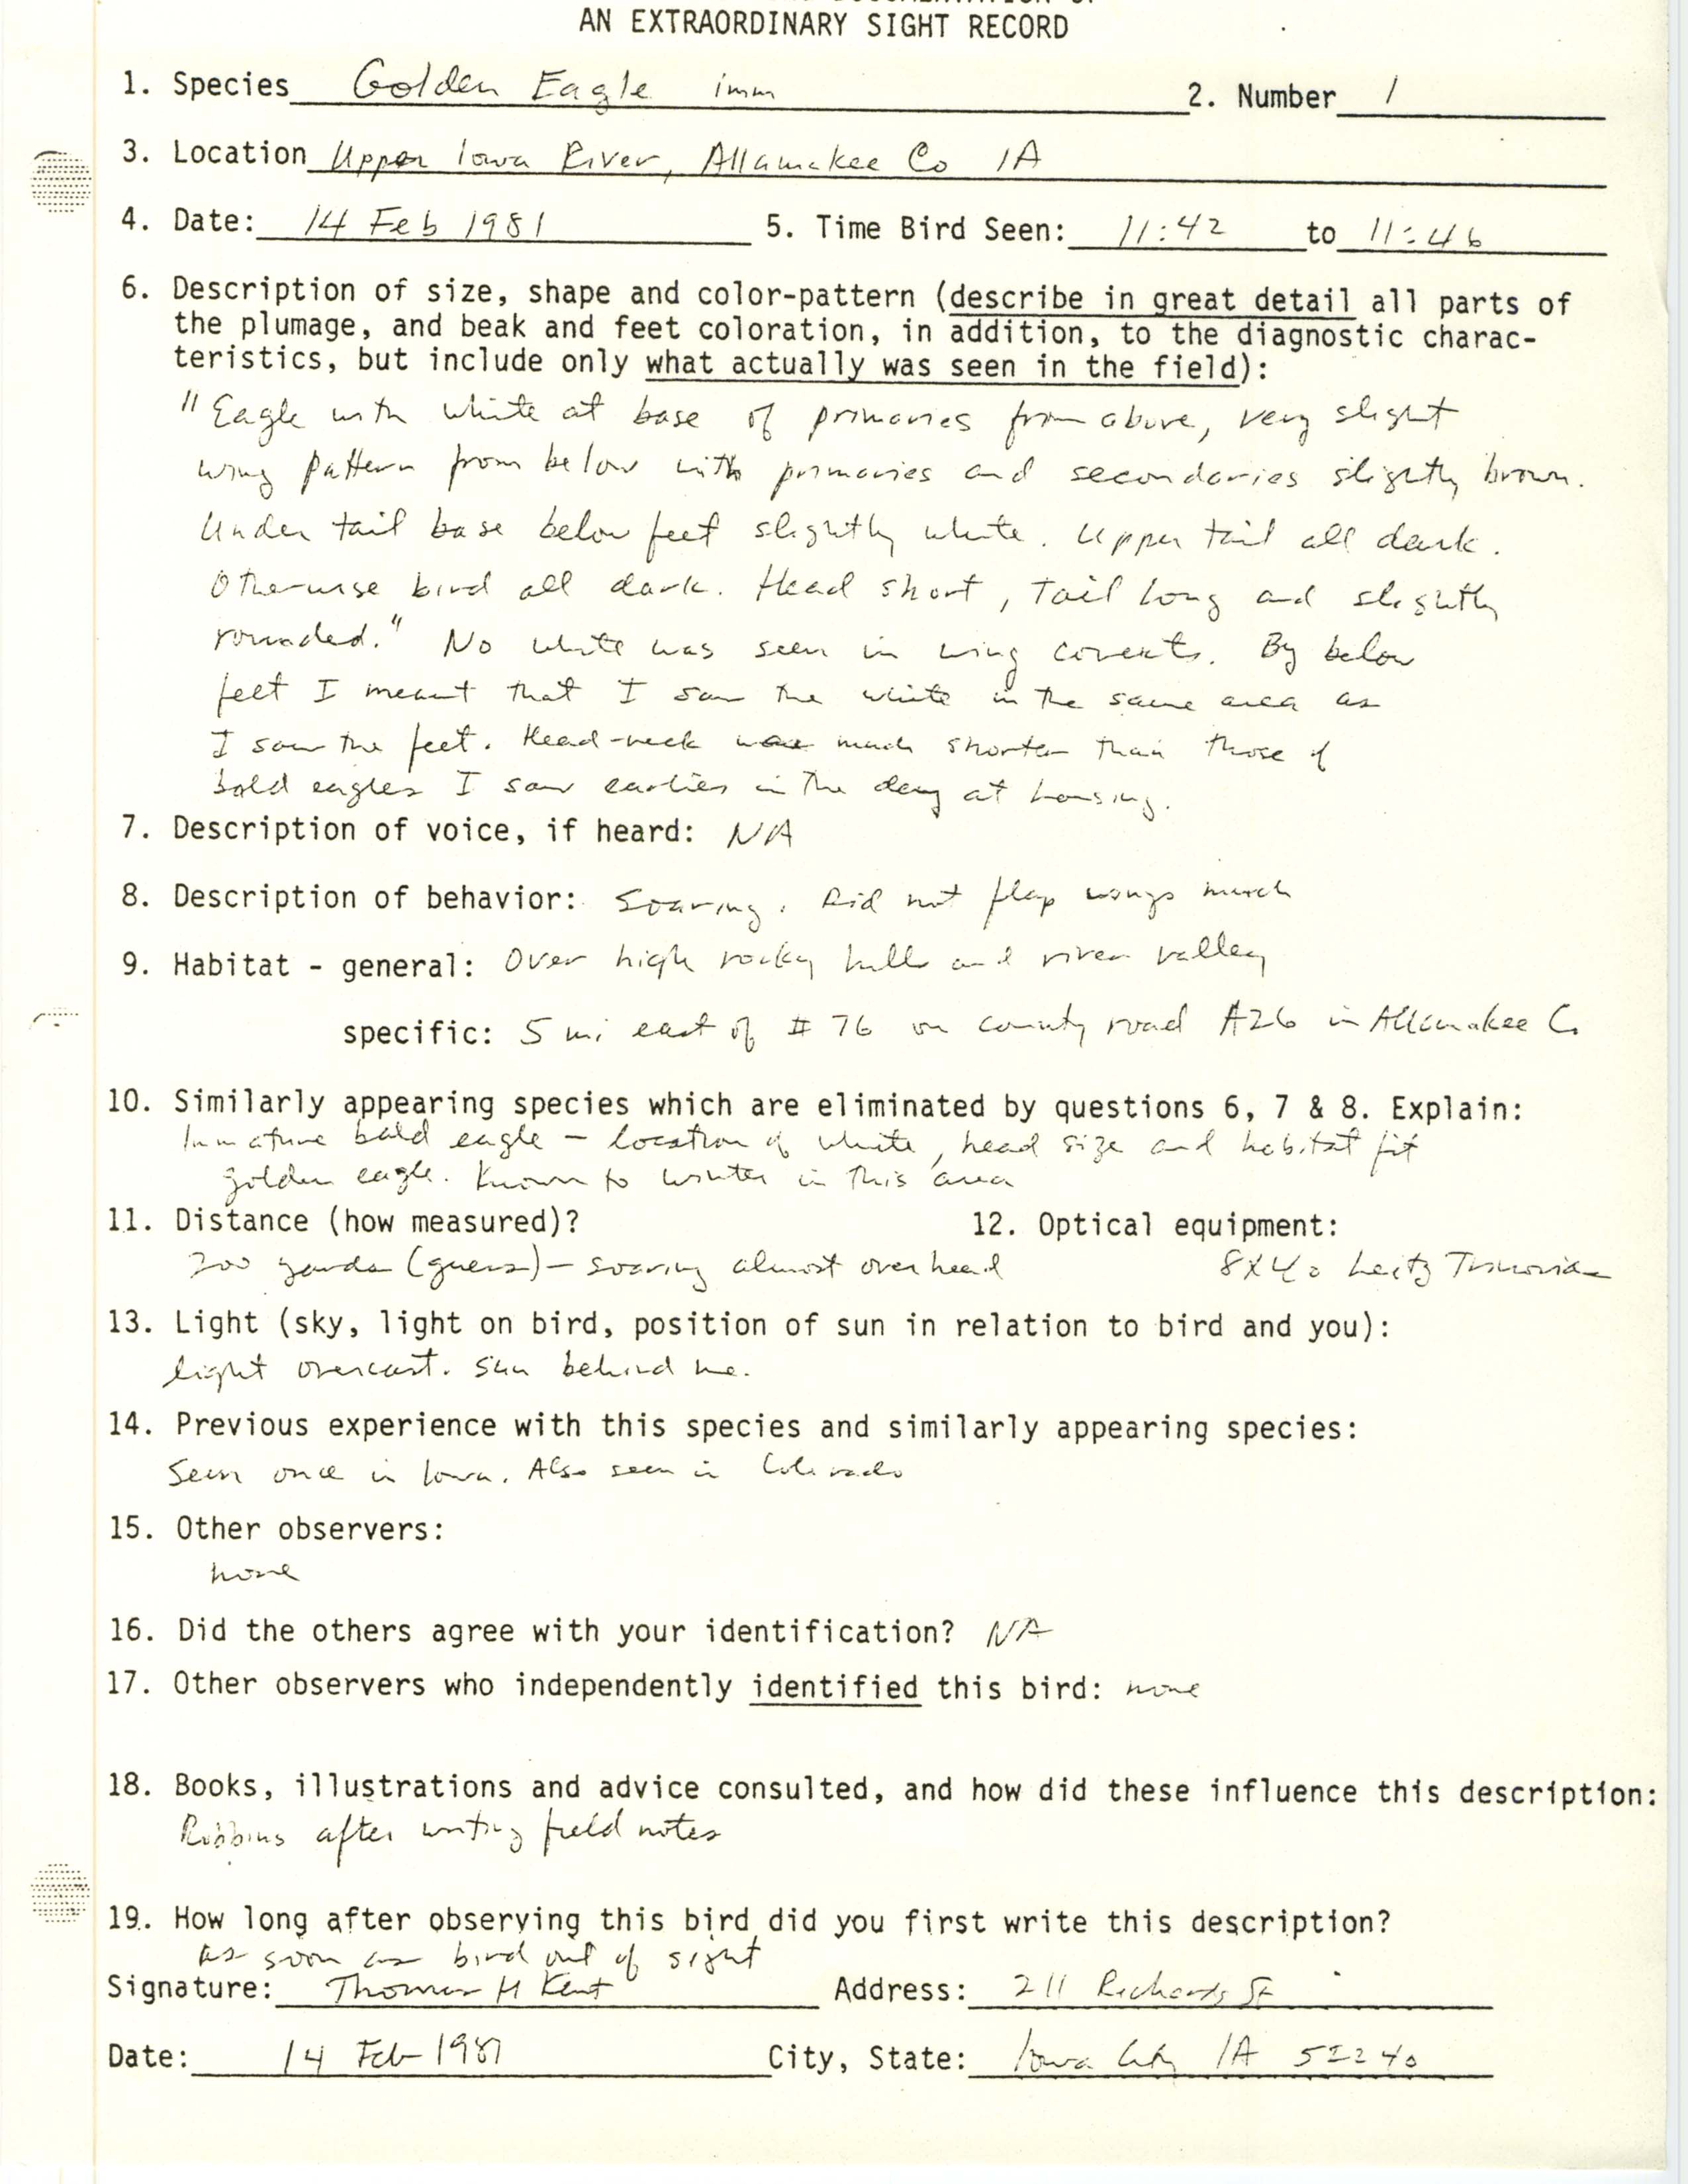 Rare bird documentation form for Golden Eagle at Upper Iowa River in Allamakee County, 1981